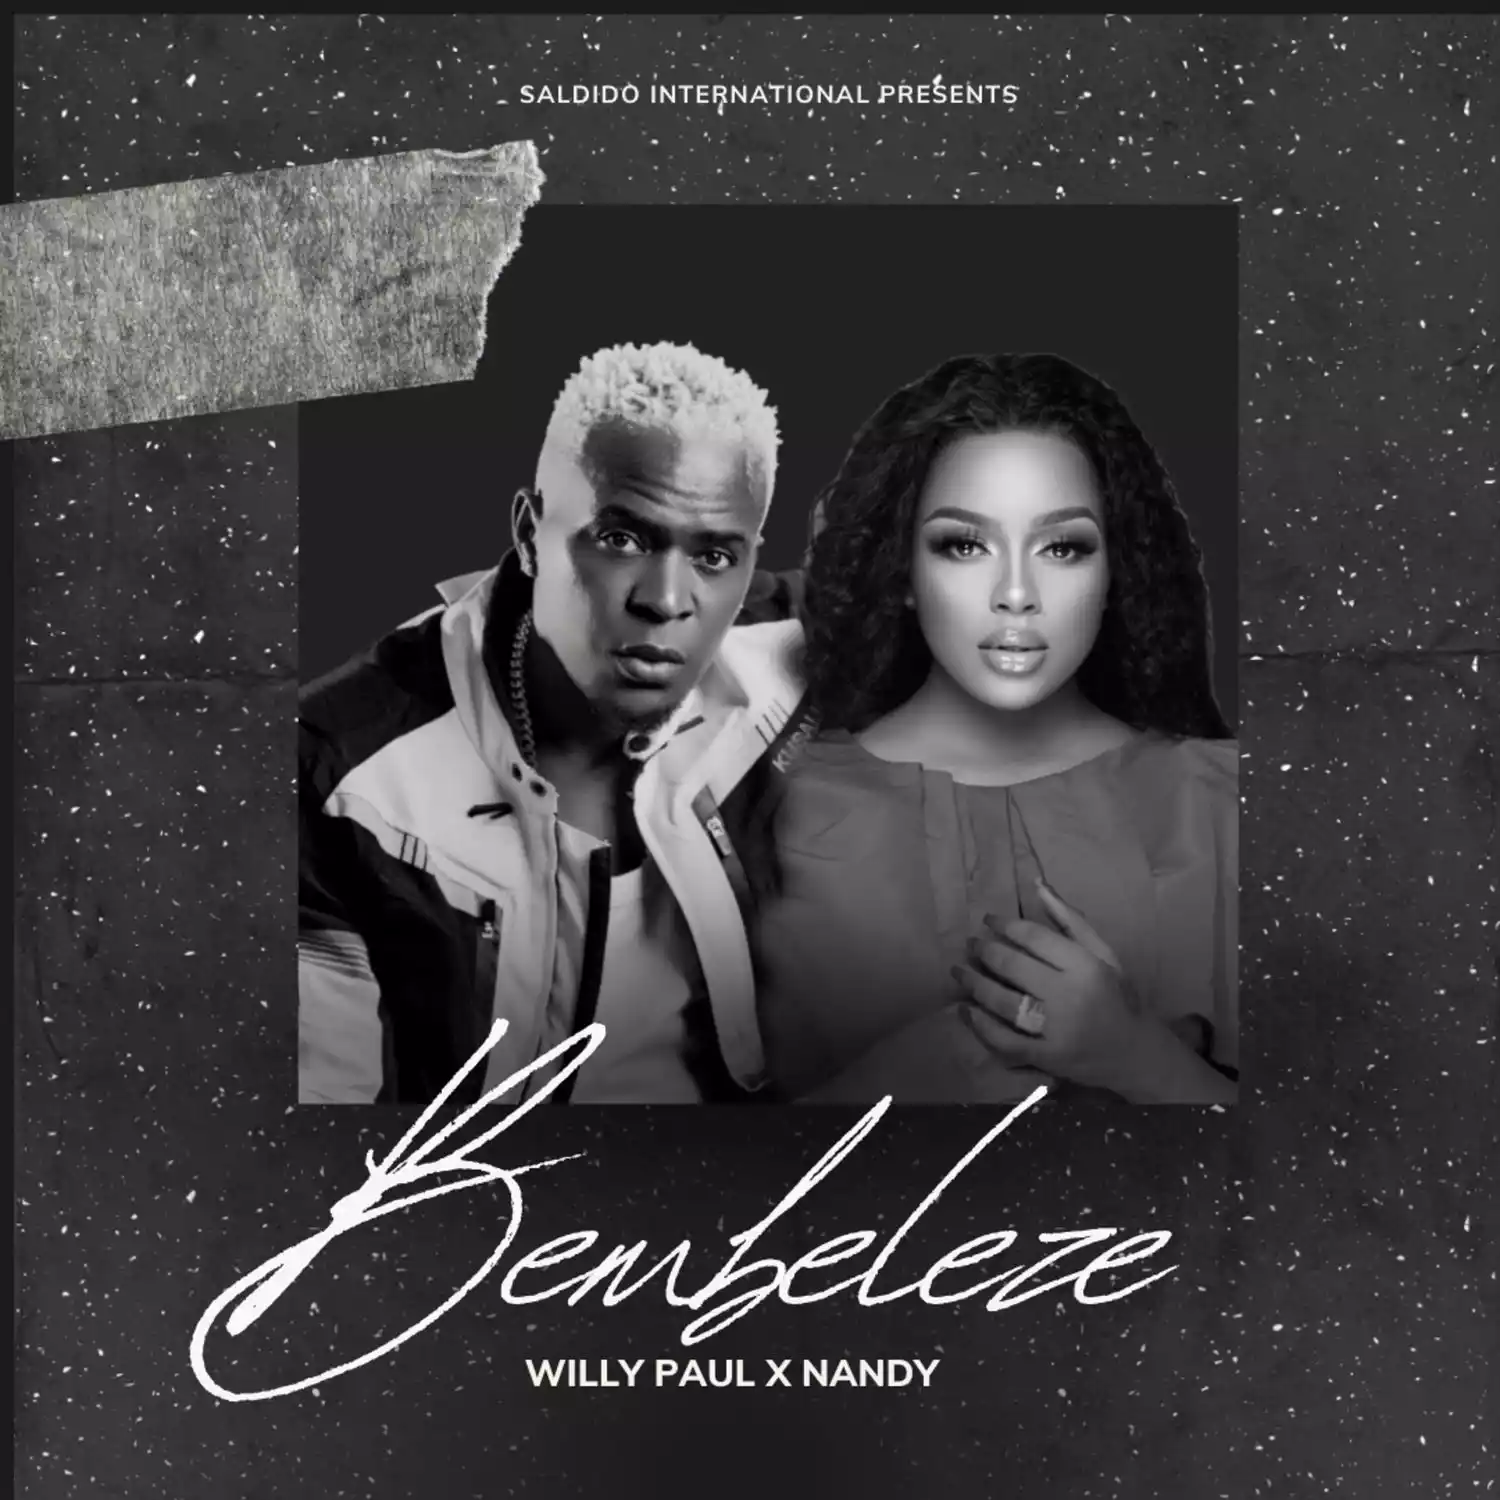 Willy Paul ft Nandy - Bembeleza Mp3 Download